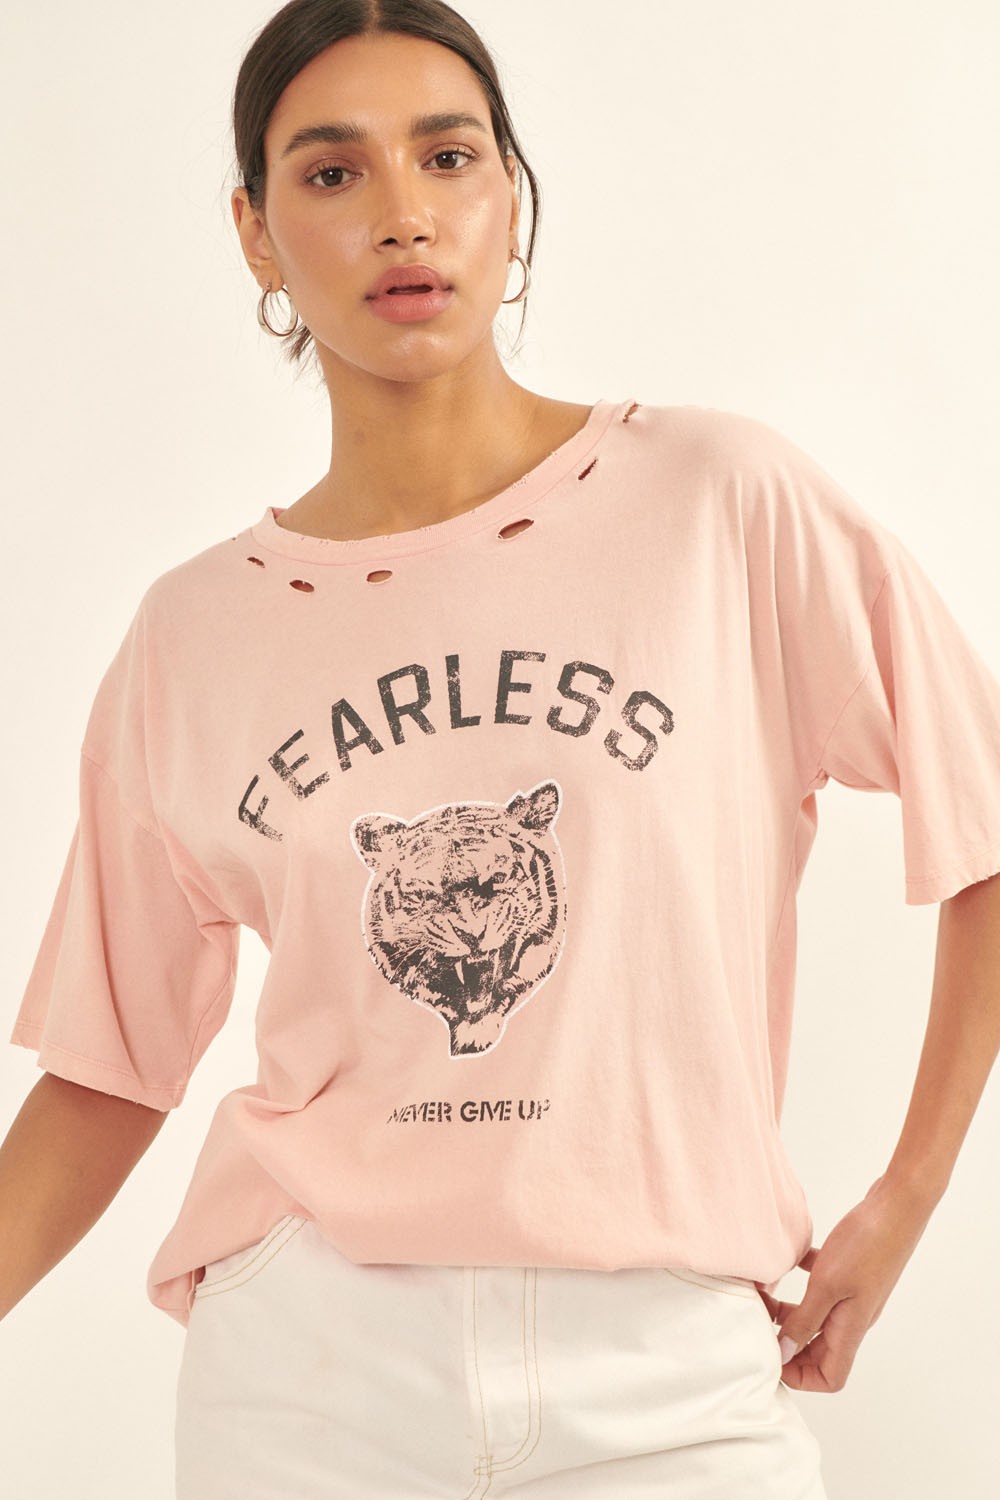 zSALE Fearless Never Give Up Tiger Vintage Distressed Graphic Tee - Pink